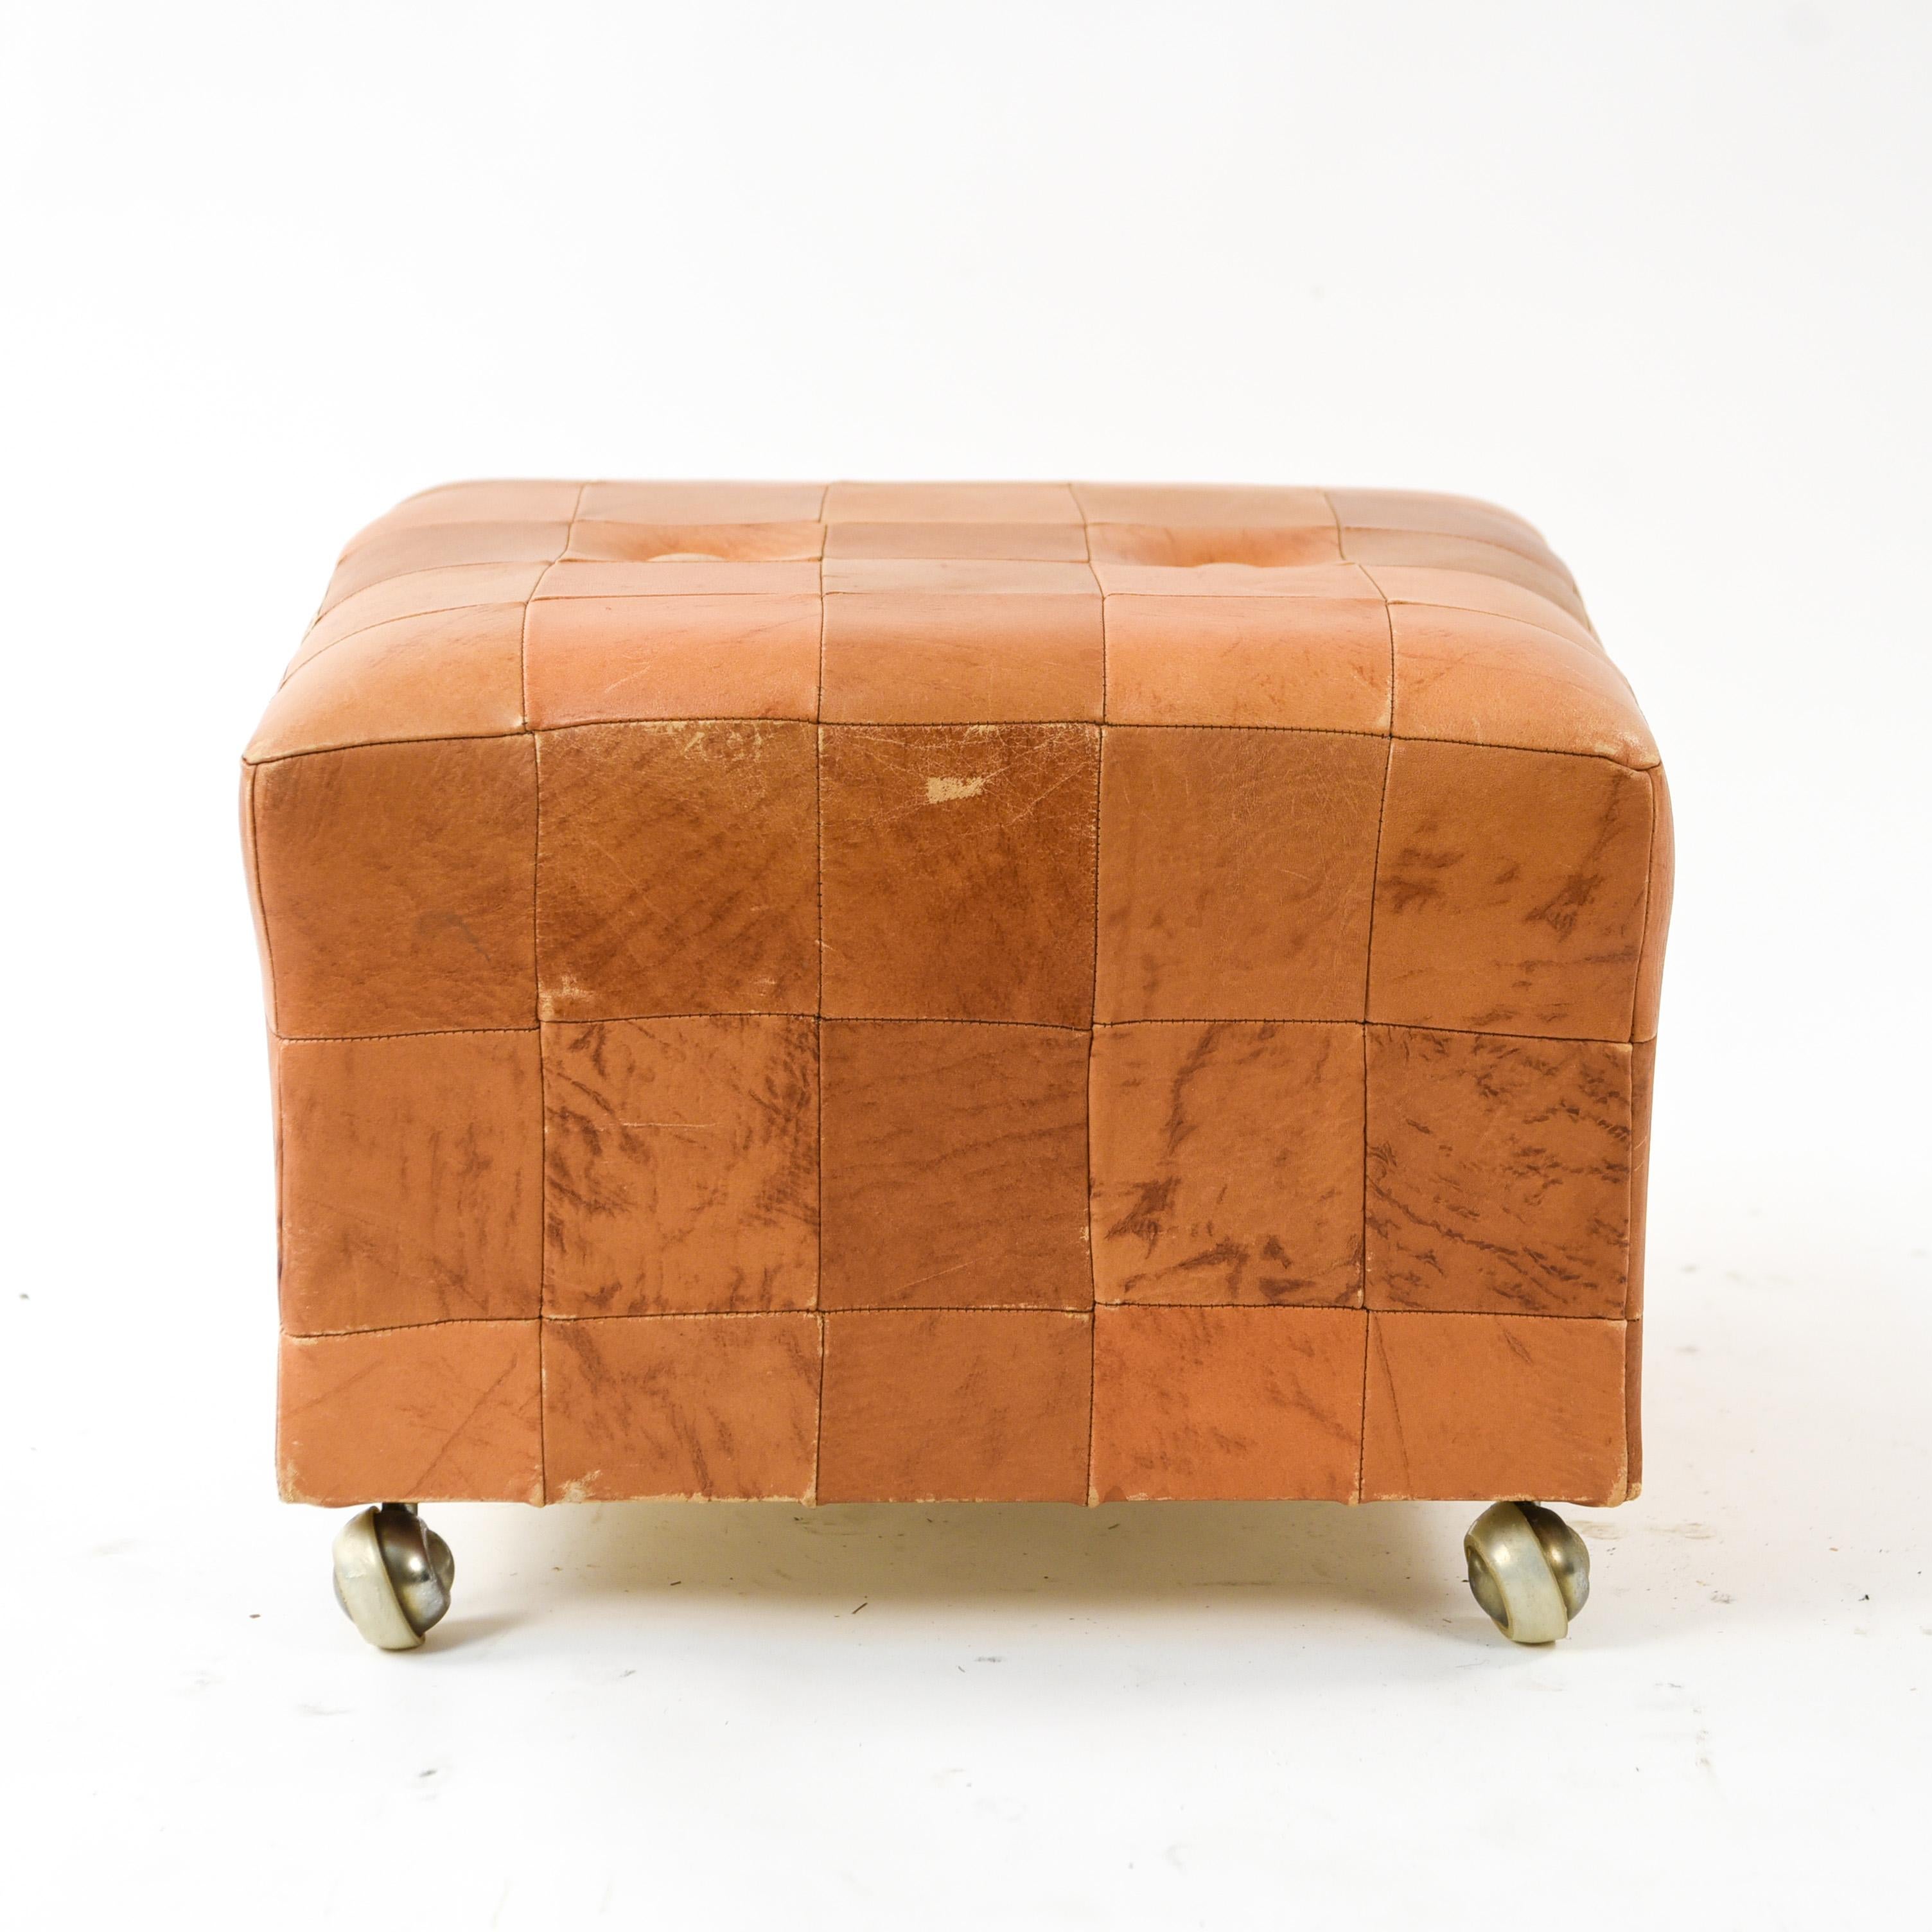 This midcentury cube ottoman is upholstered in butterscotch leather and features two button tufts on top. The upholstery creates squares over the surface of the ottoman which provides an aspect of visual interest. This piece is on casters which